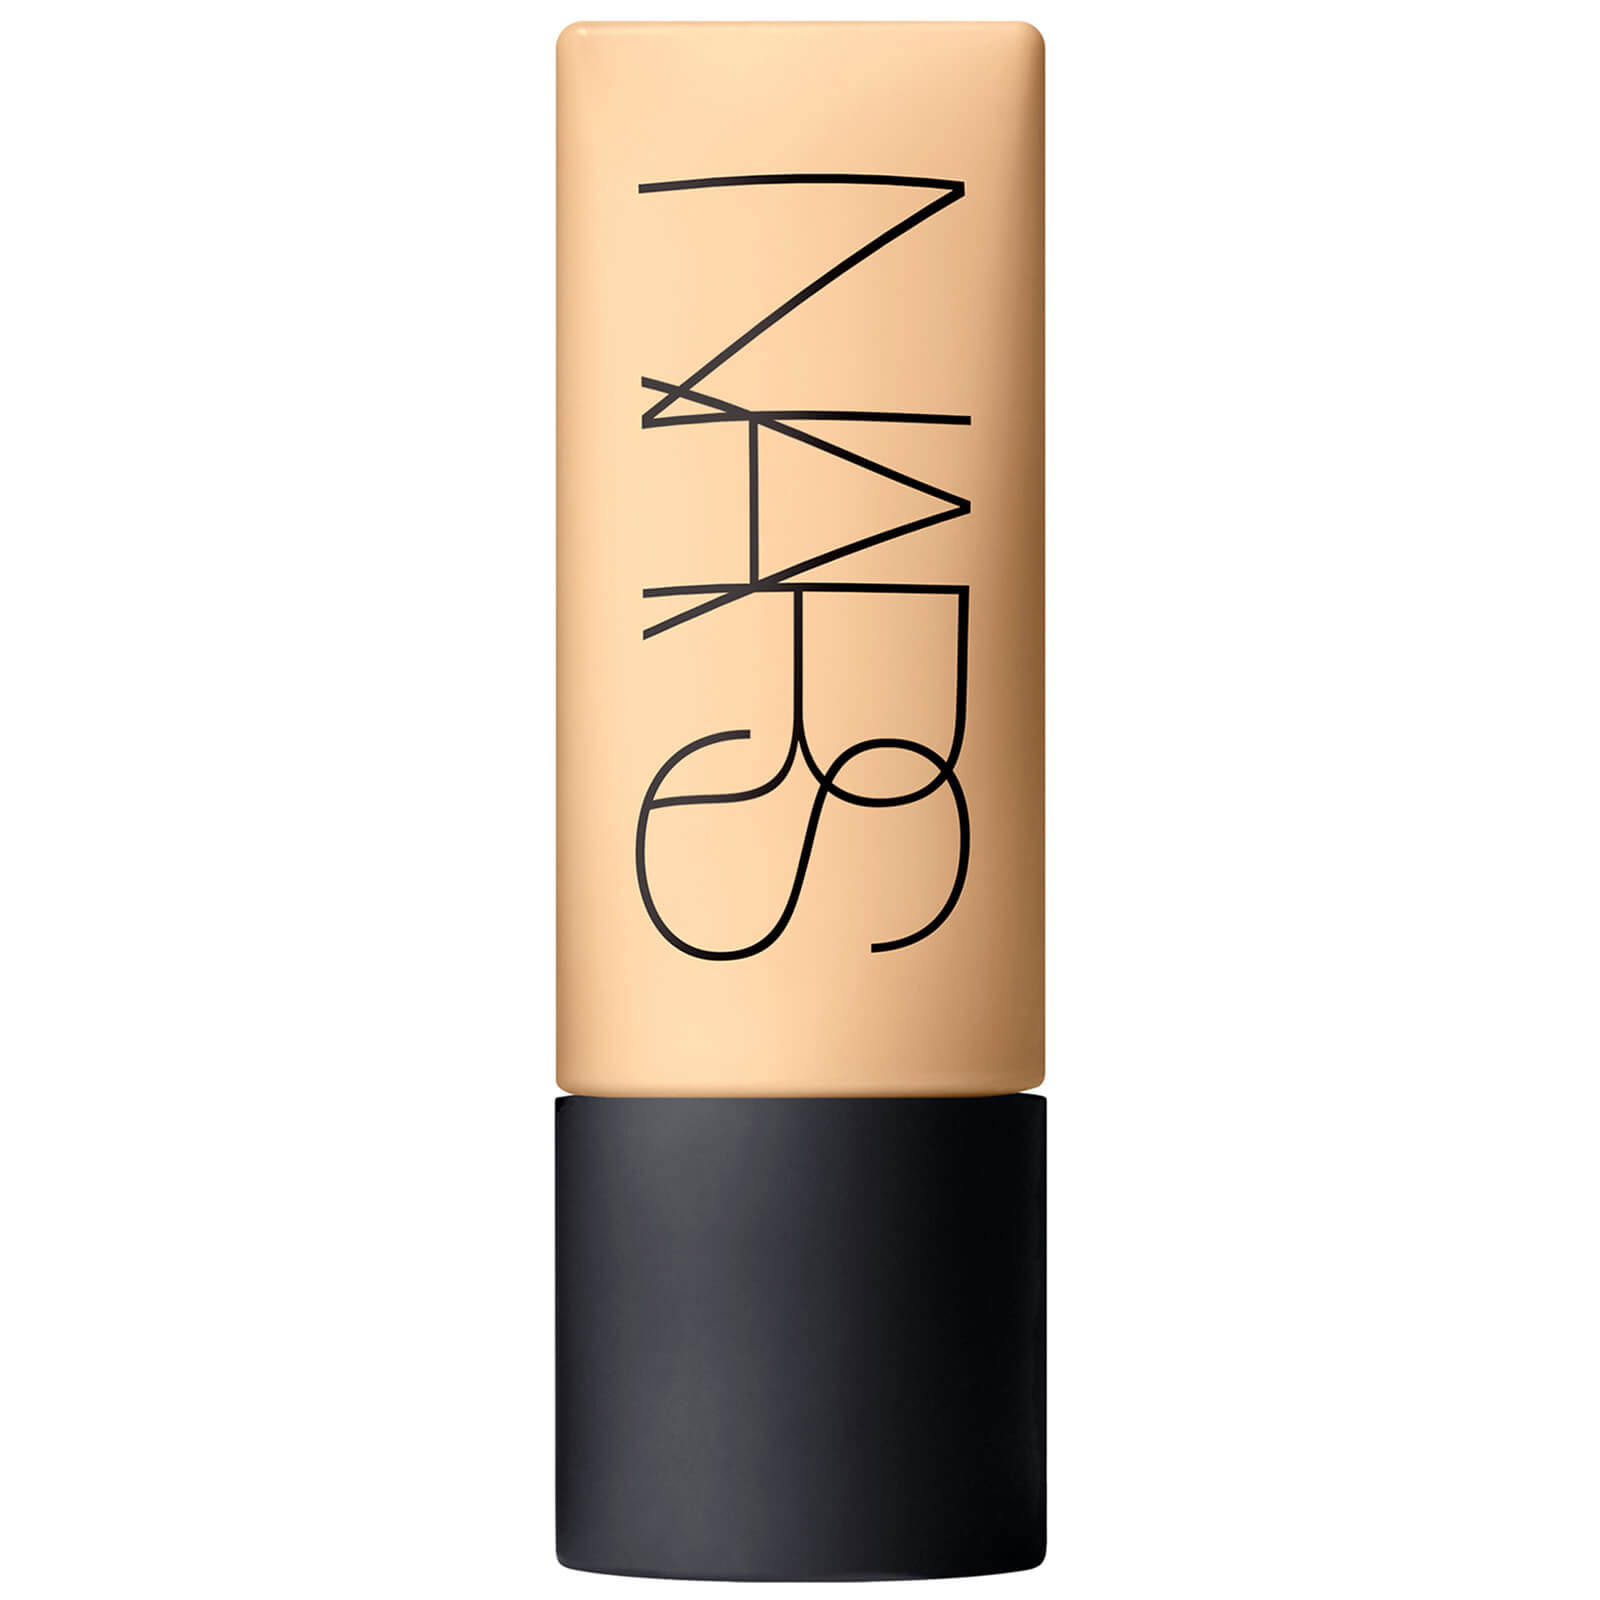 NARS Soft Matte Complete Foundation 45ml (Various Shades) - Deauville